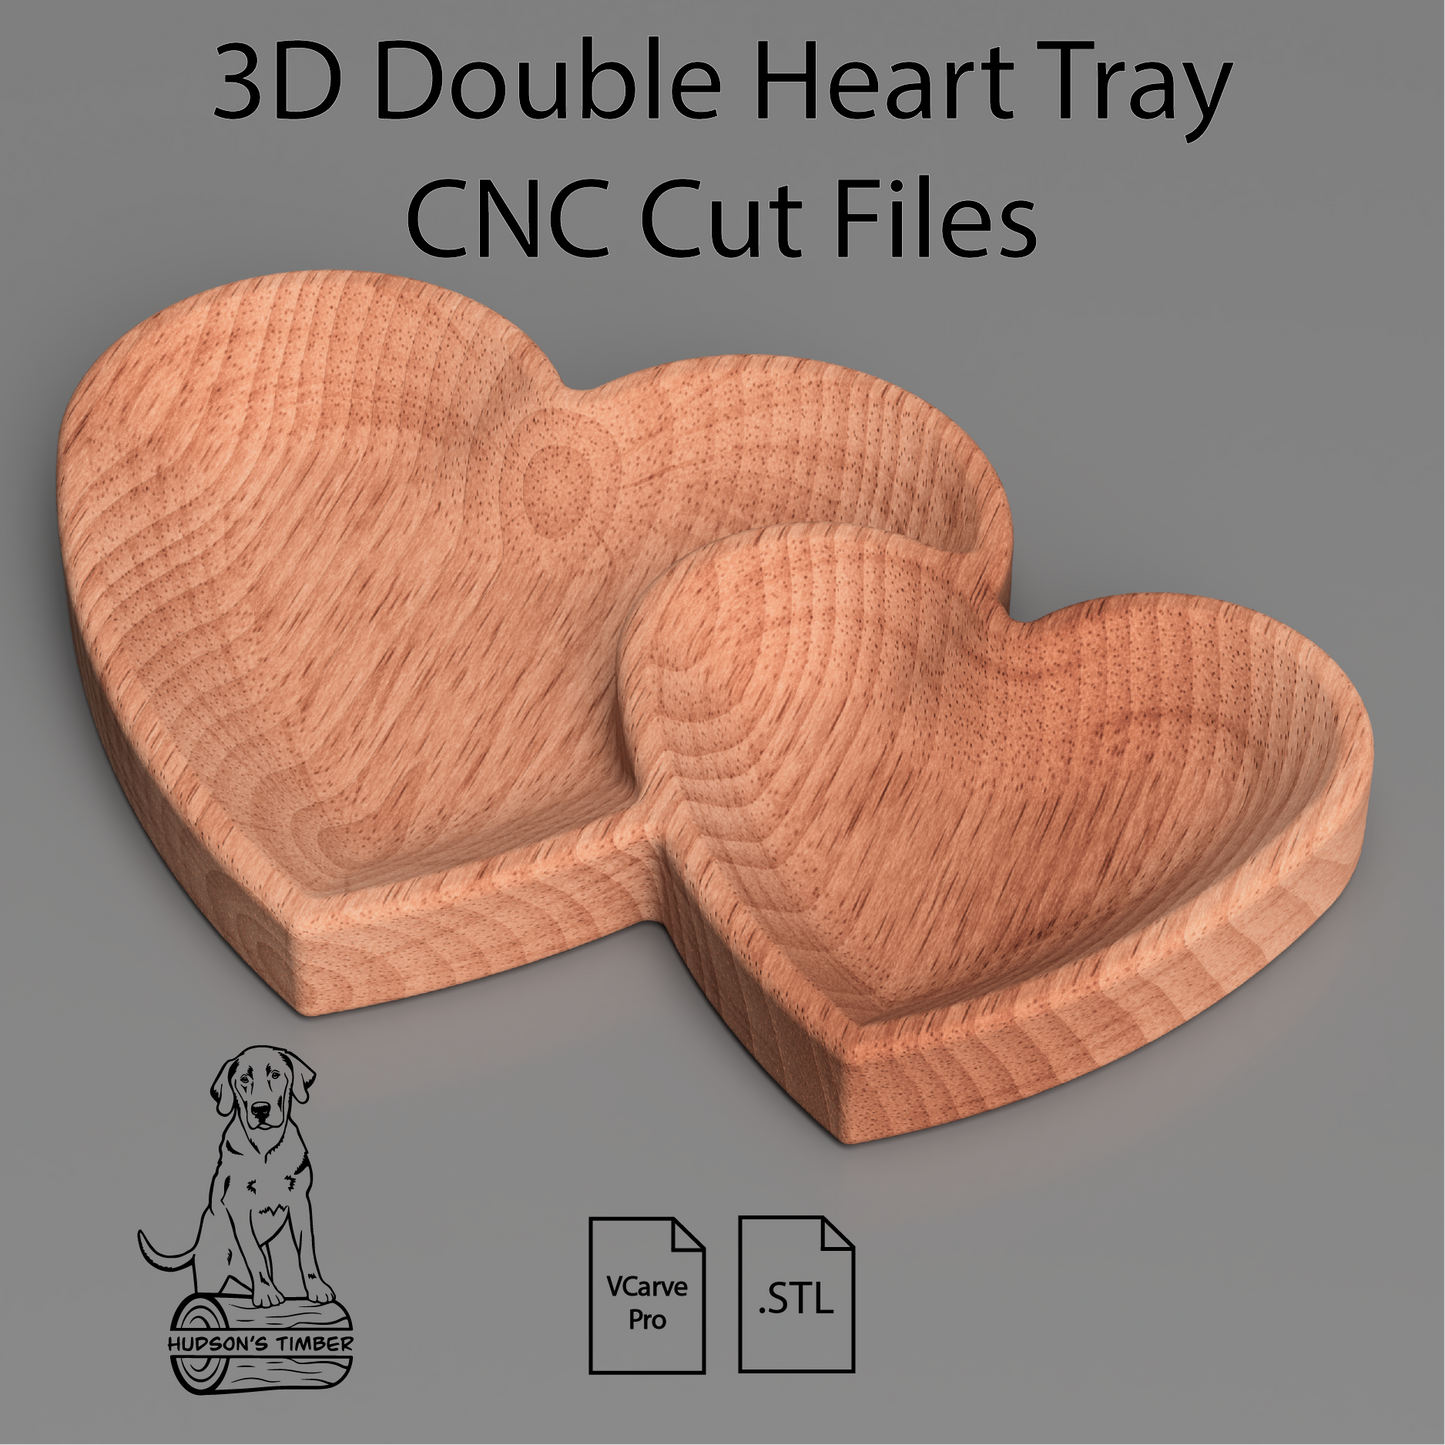 double heart tray available in vcarve crv format as well as stl